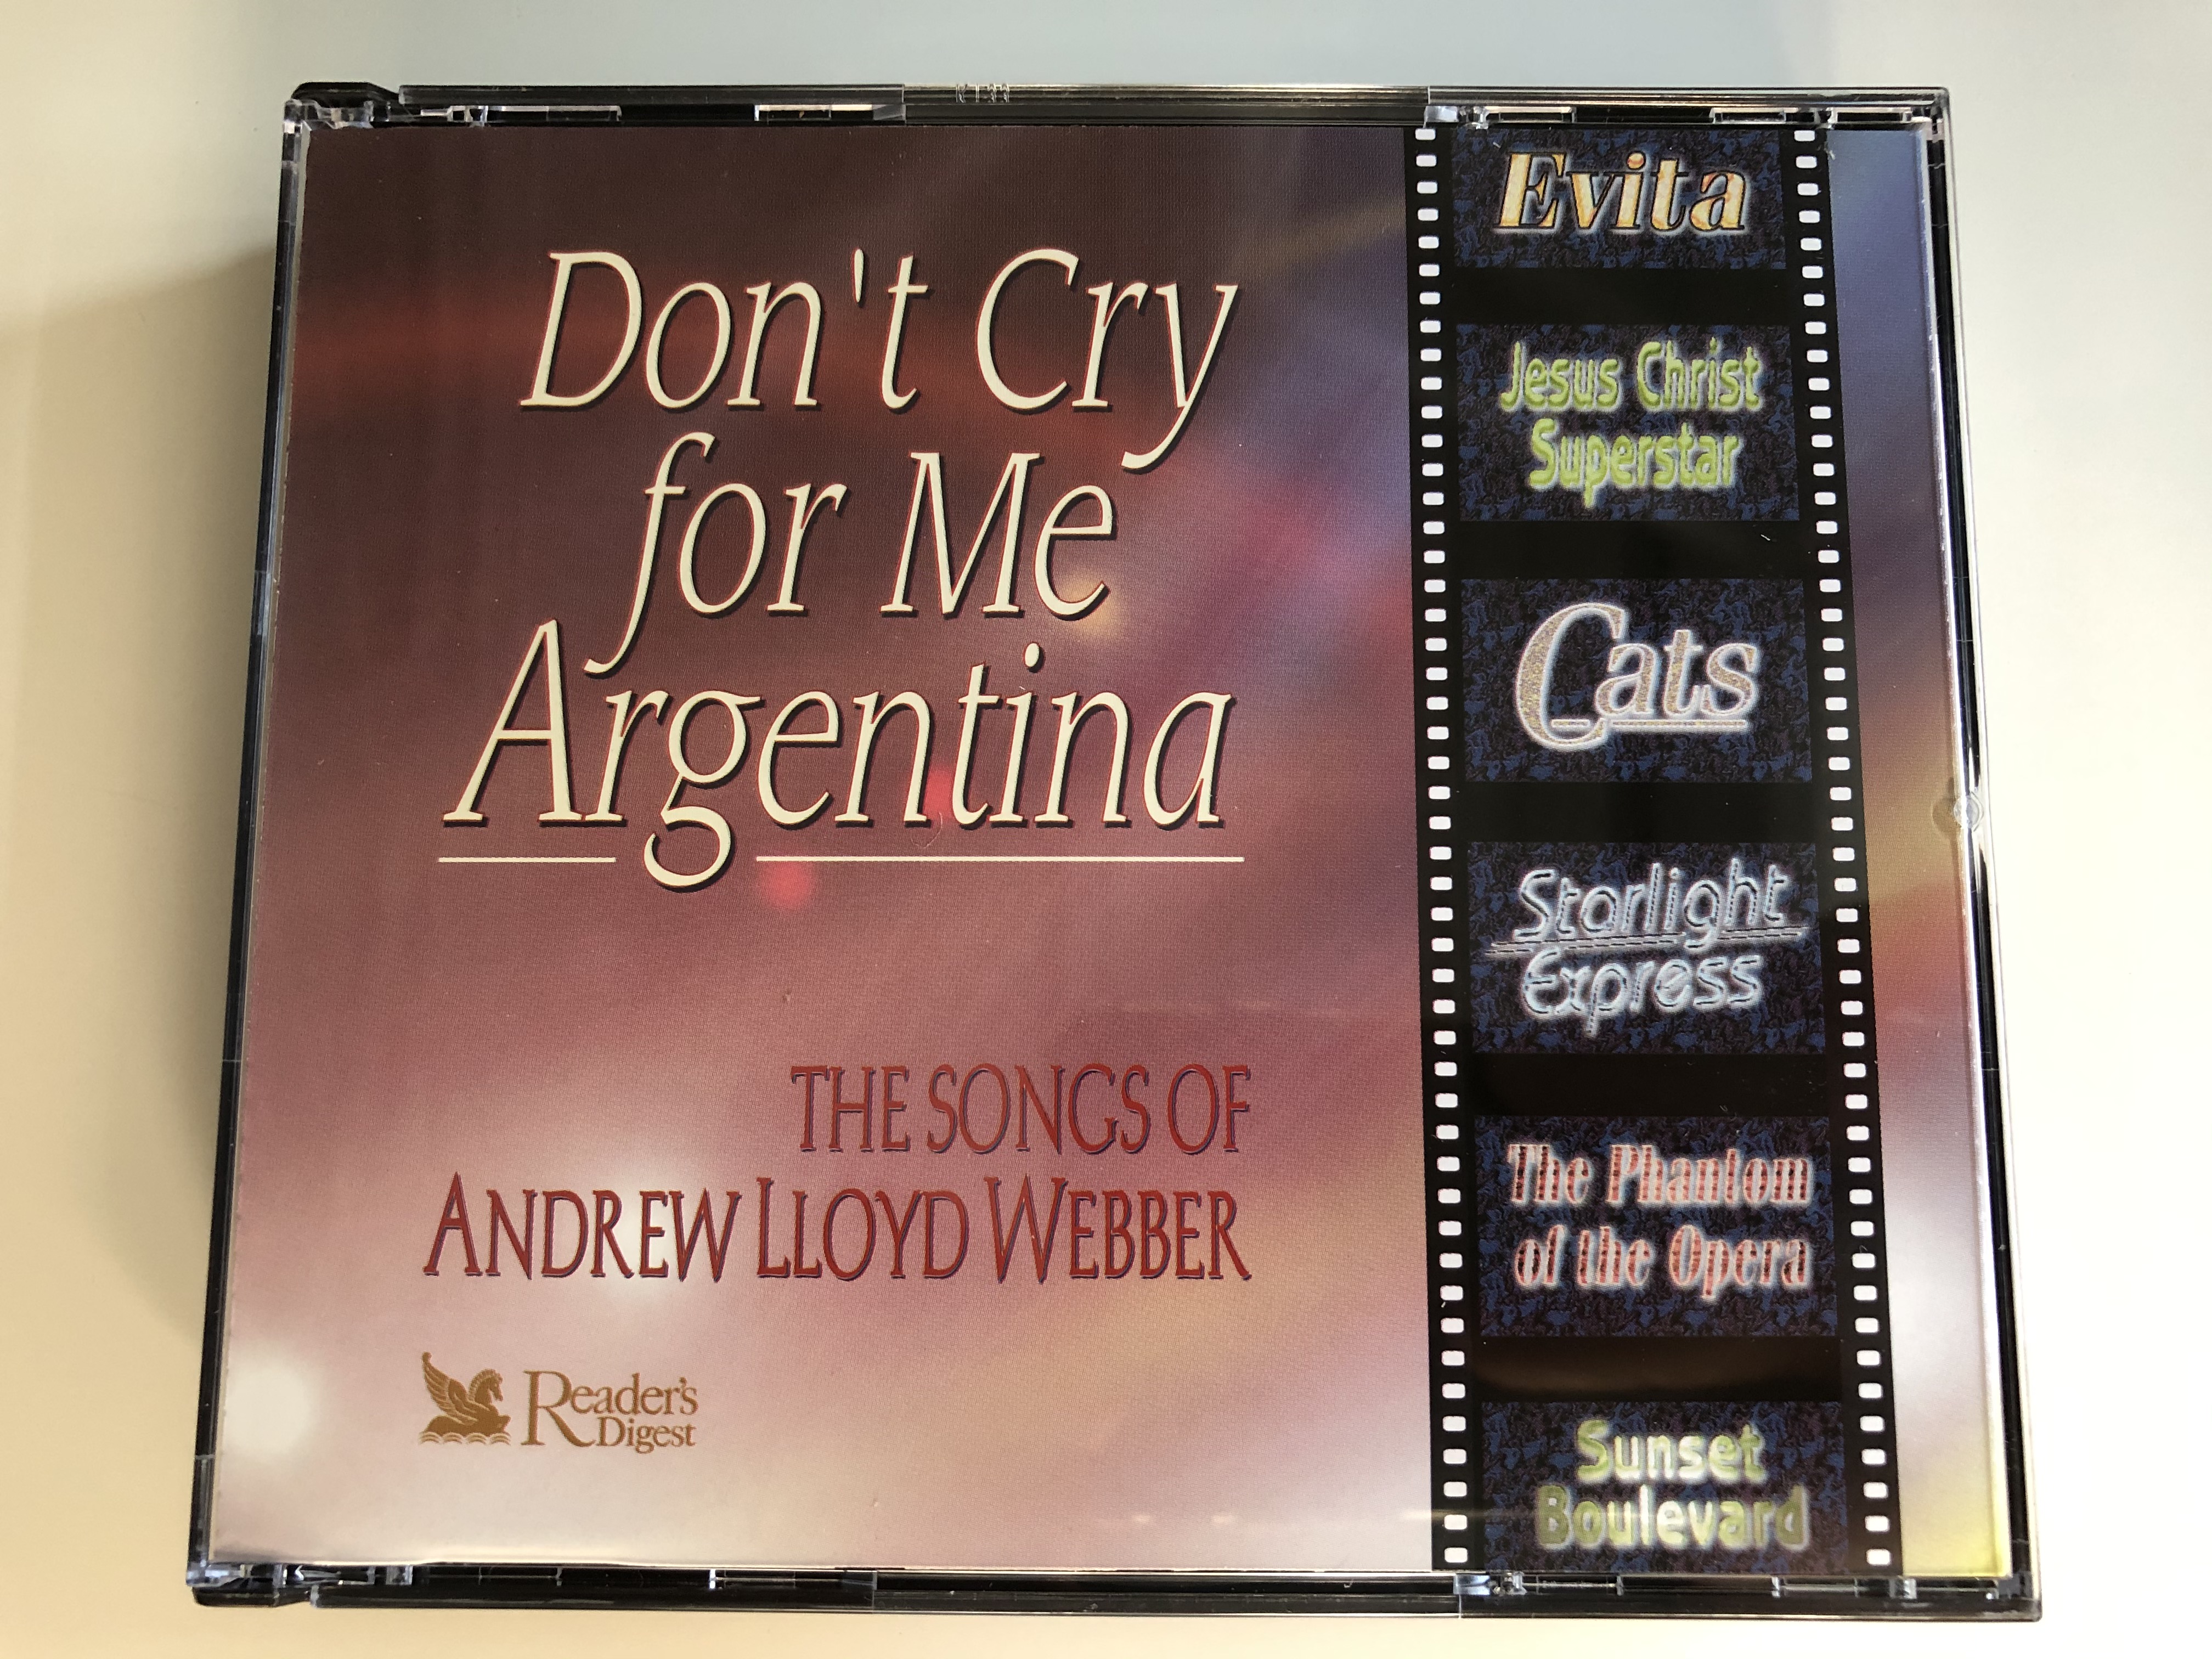 don-t-cry-for-me-argentina-the-songs-of-andrew-lloyd-webber-evita-jesus-christ-superstar-cats-starlight-express-the-phantom-of-the-opera-sunset-boulevard-reader-s-digest-3x-audio-cd-c9600-1-.jpg